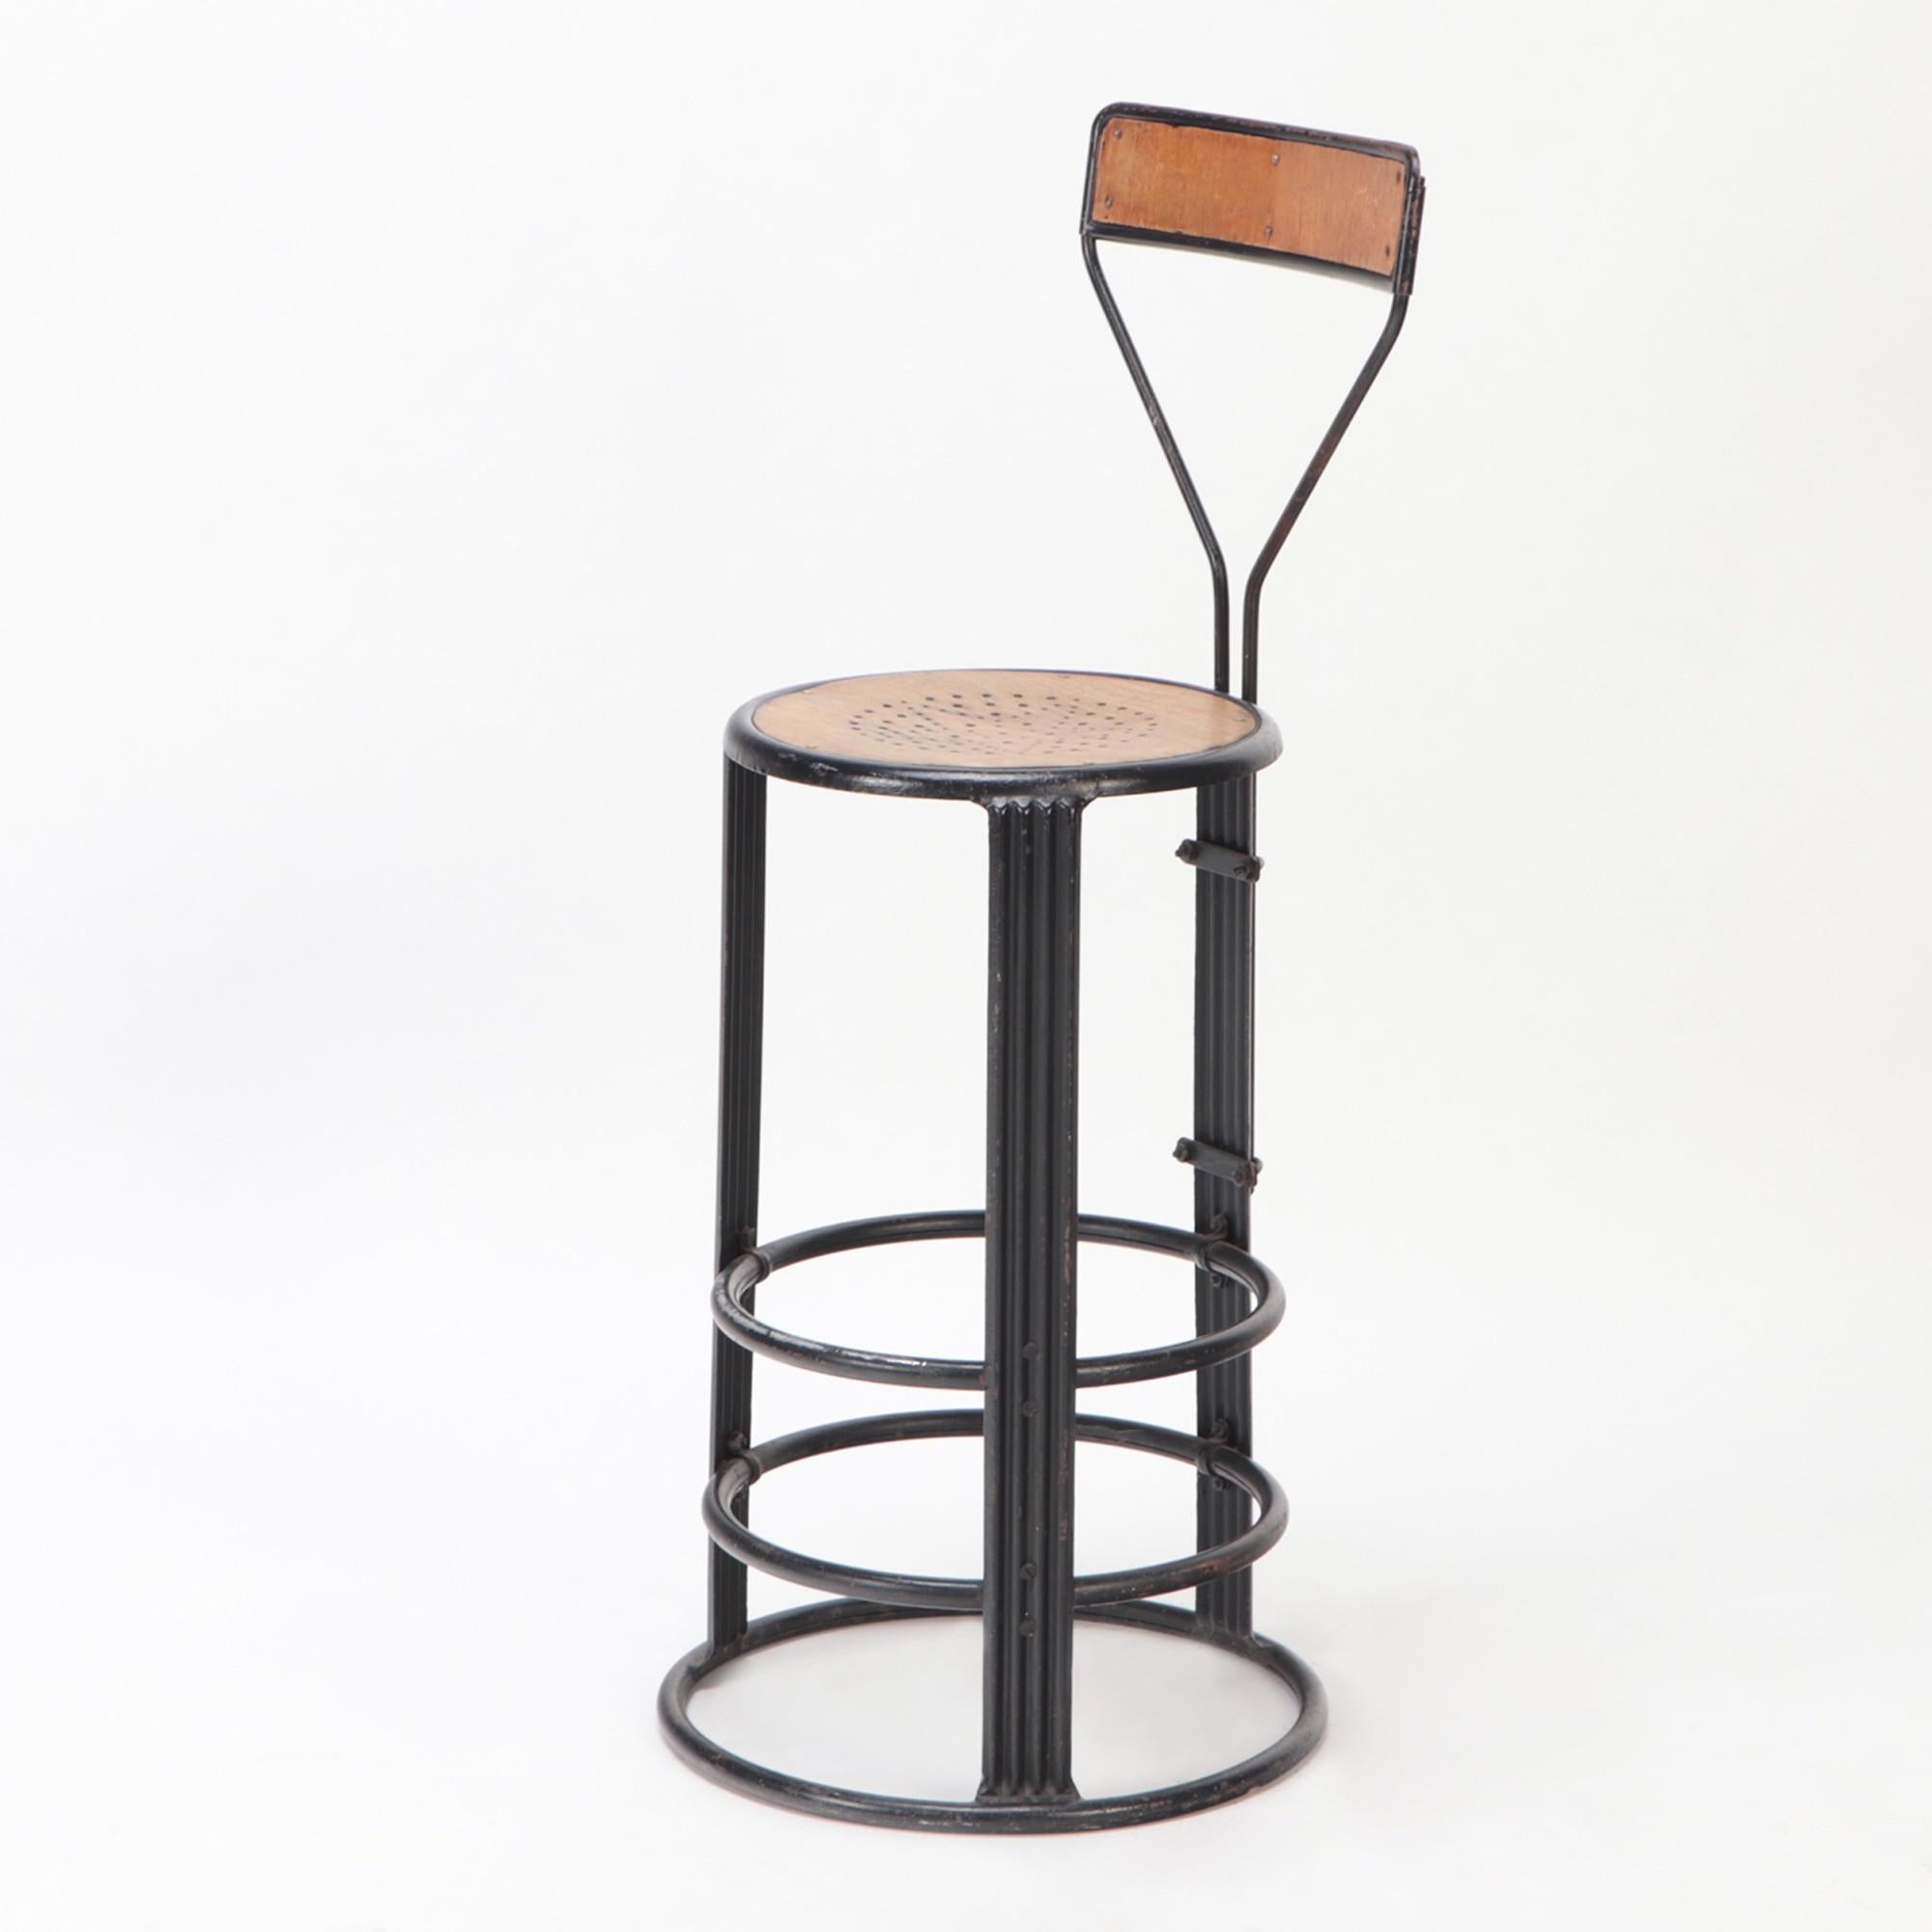 A French Iron counter stool with wooden seat and backrest, C 1910.